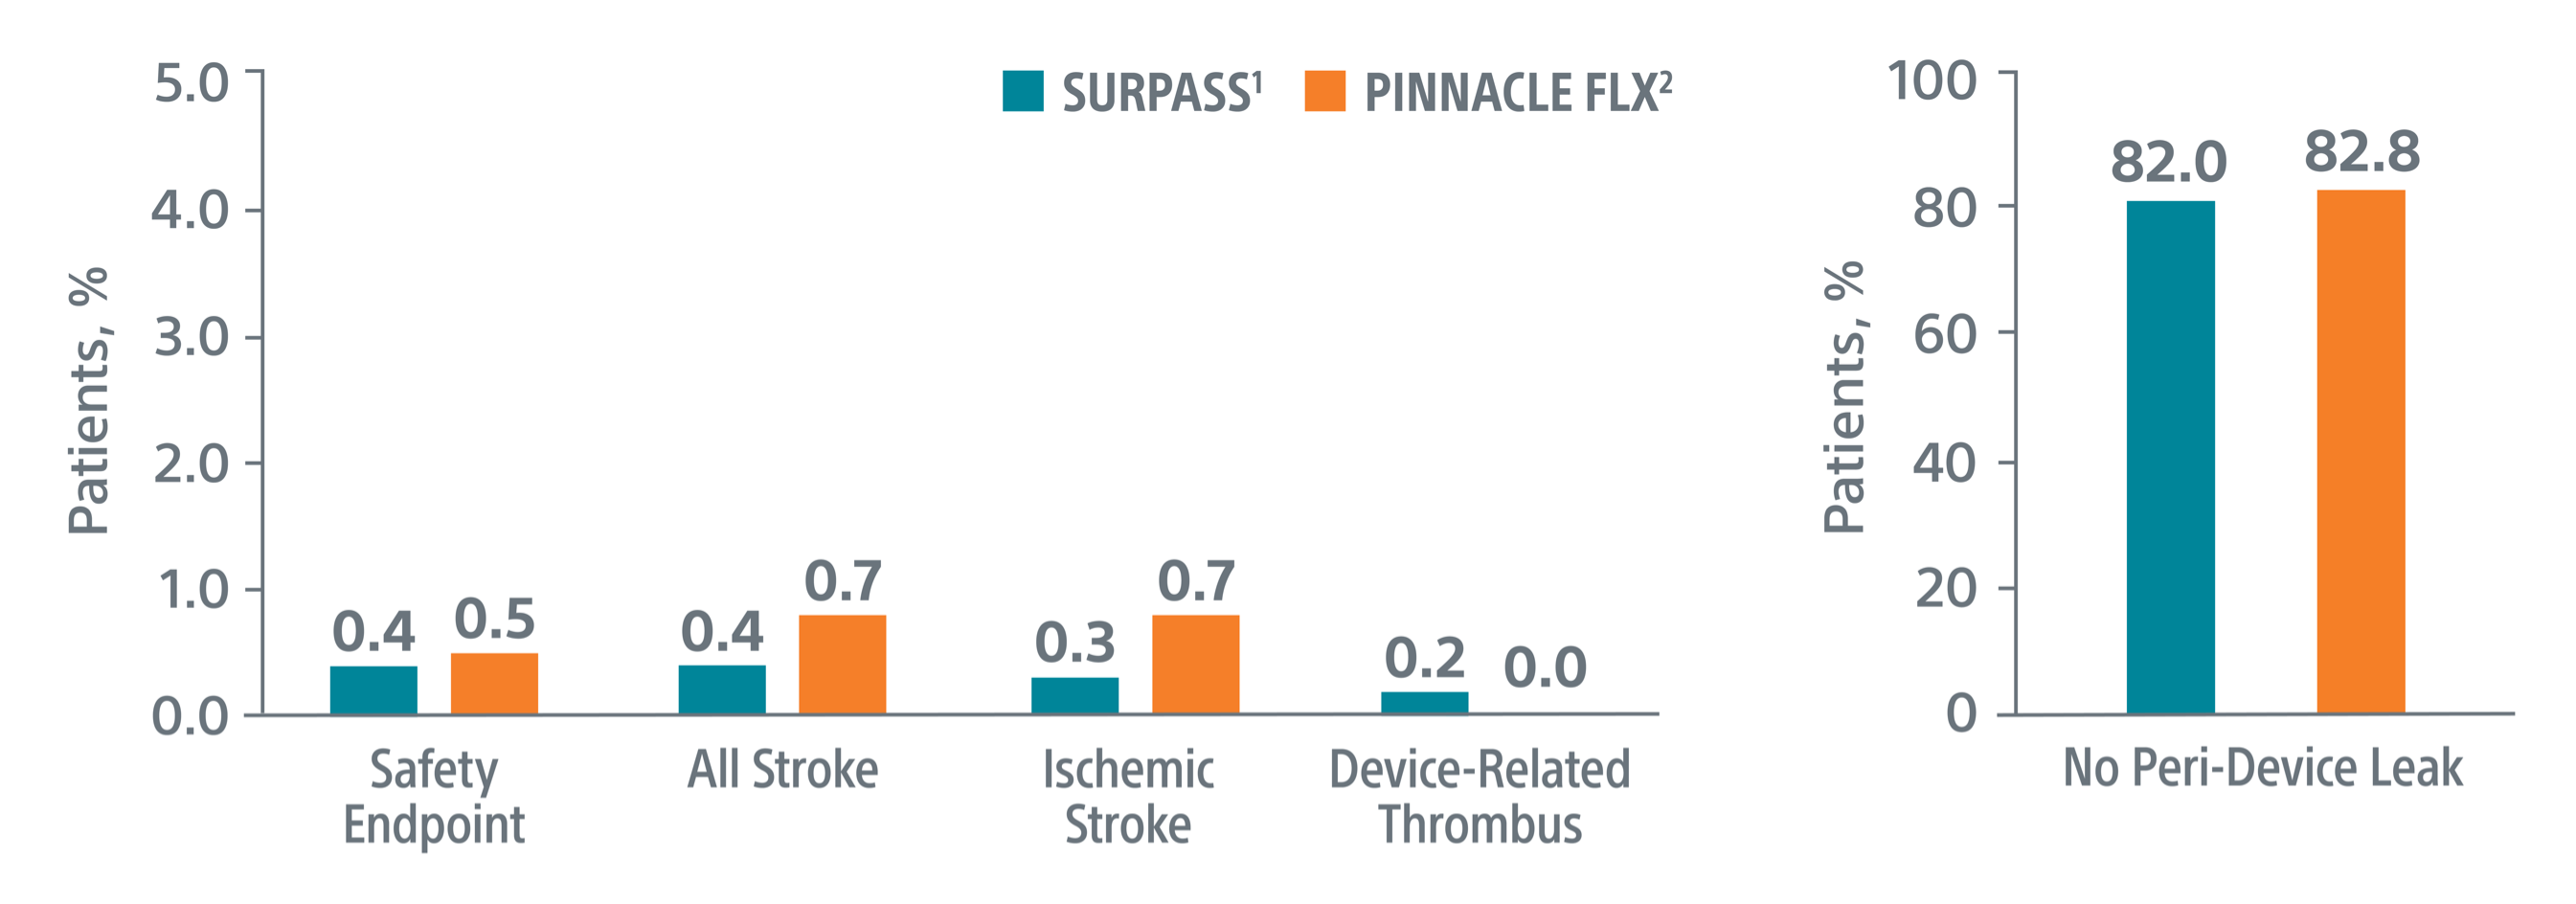 SURPASS Real-world Outcomes Reinforce PINNACLE FLX Trial Outcomes